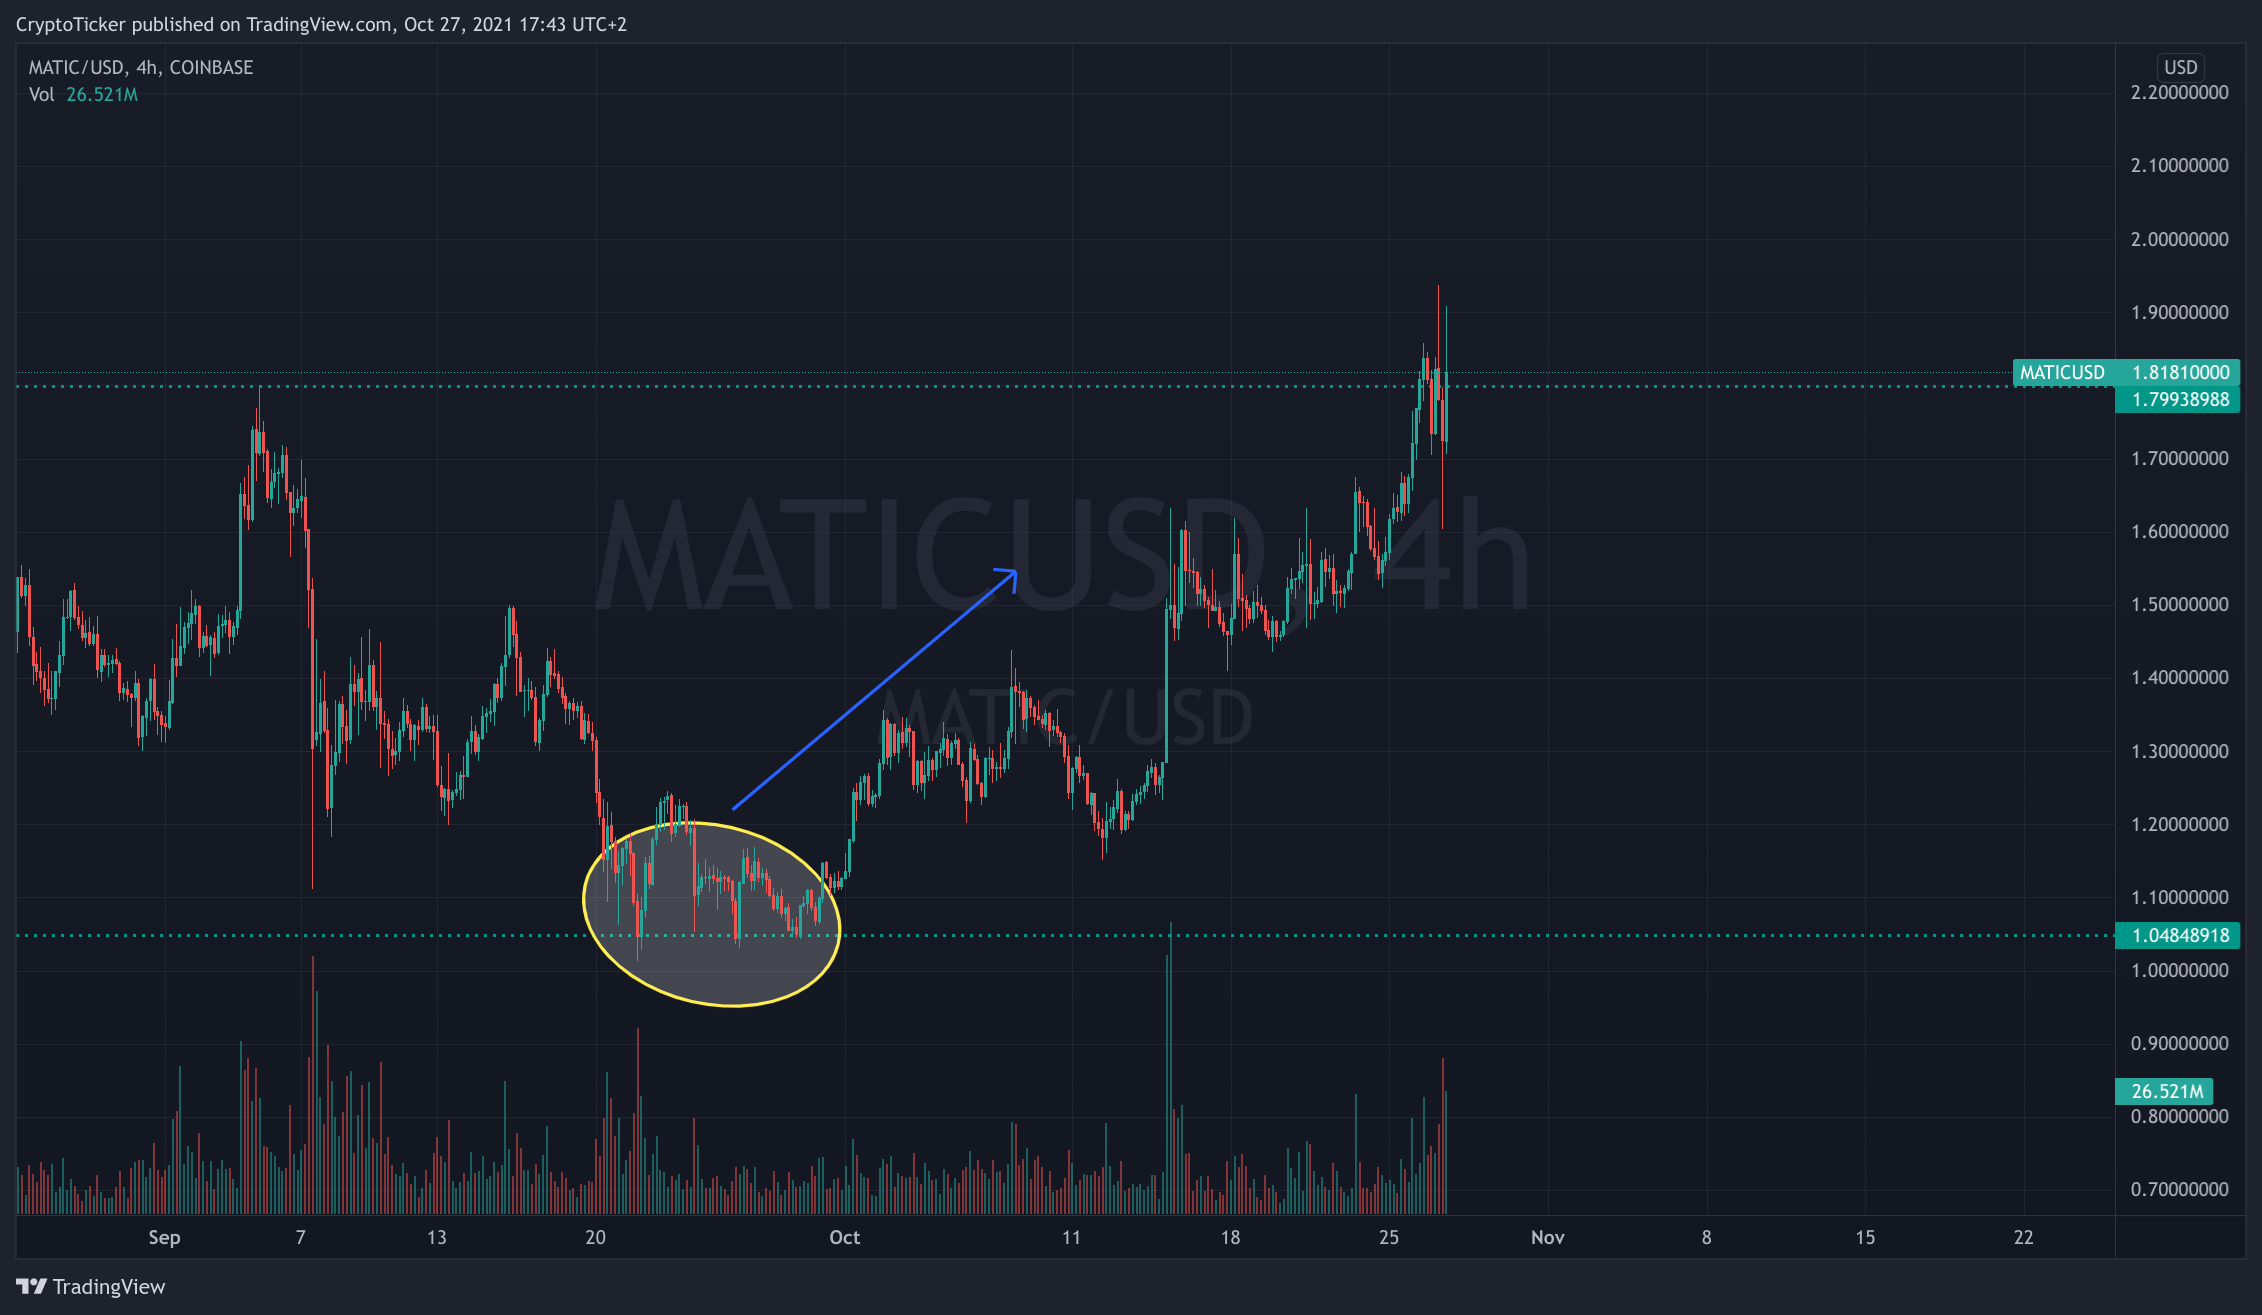 MATIC/USD 4-hours chart showing the trend reversal of MATIC